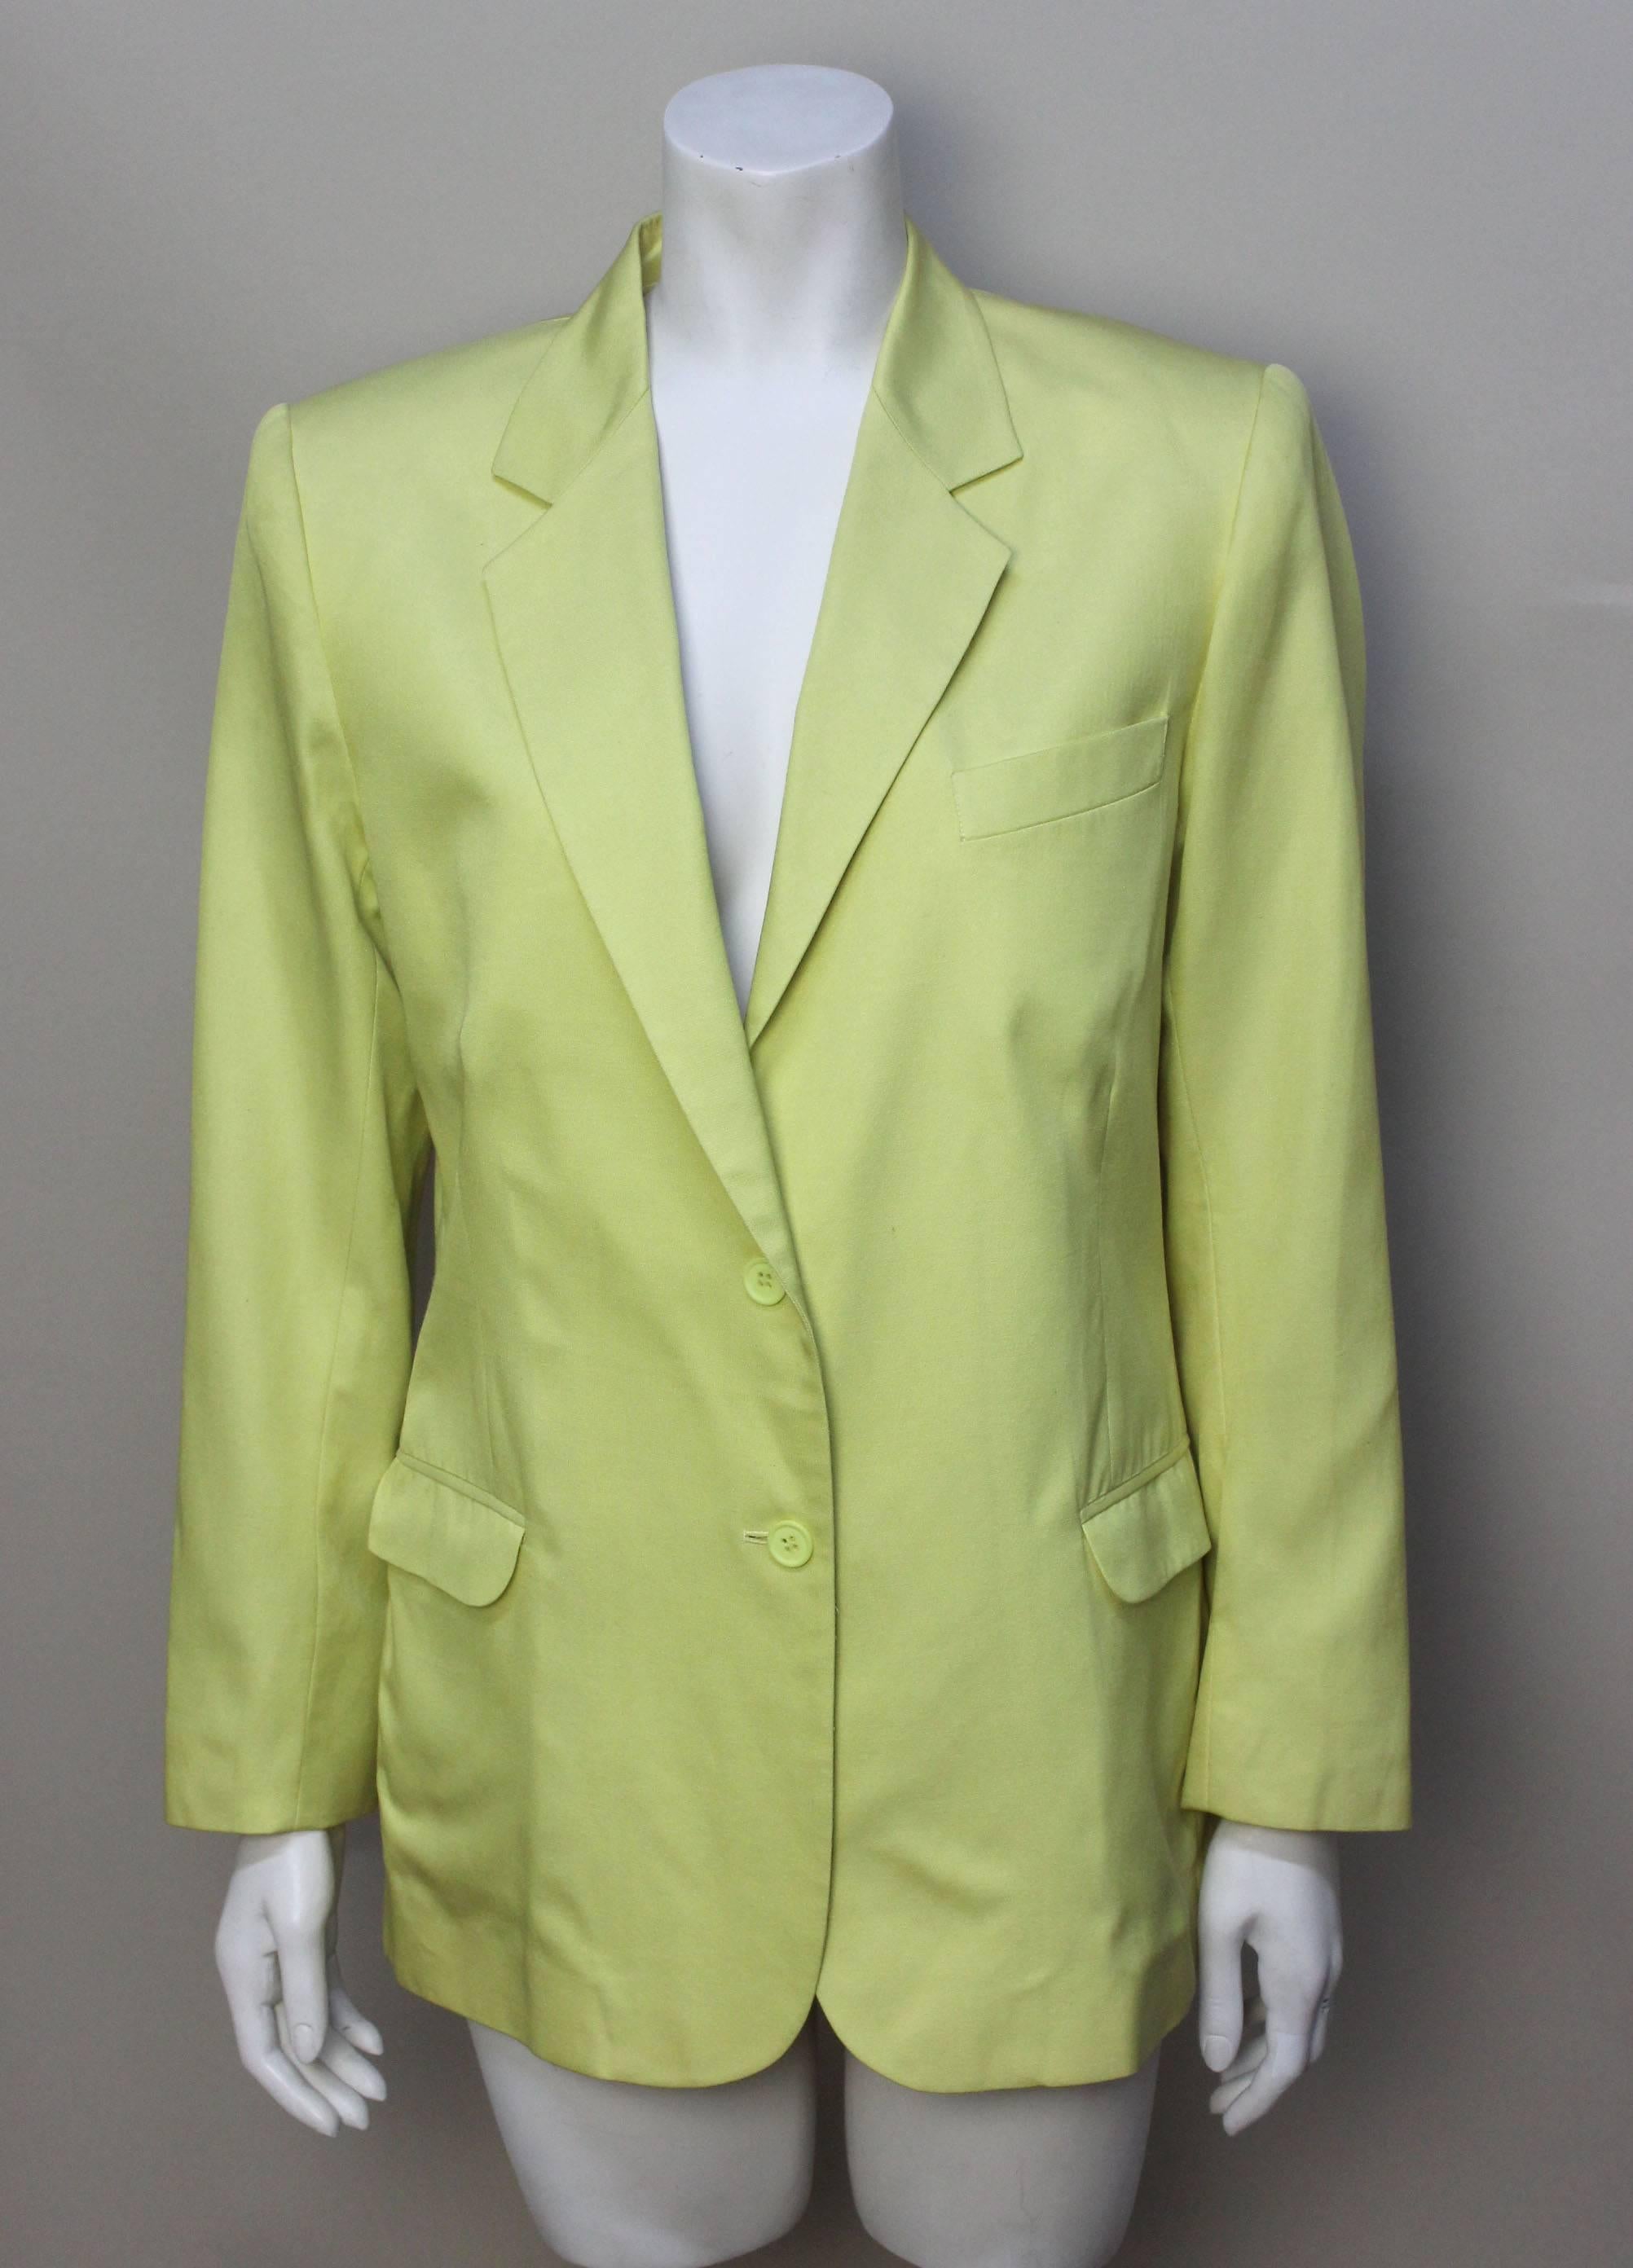 This style of jacket is based on the lines of a traditional mens suit jacket with a peaked lapel, diagonal breast pocket, and two flap pockets. The bright color is what makes it pure Sprouse with its vibrant lemon hue. 